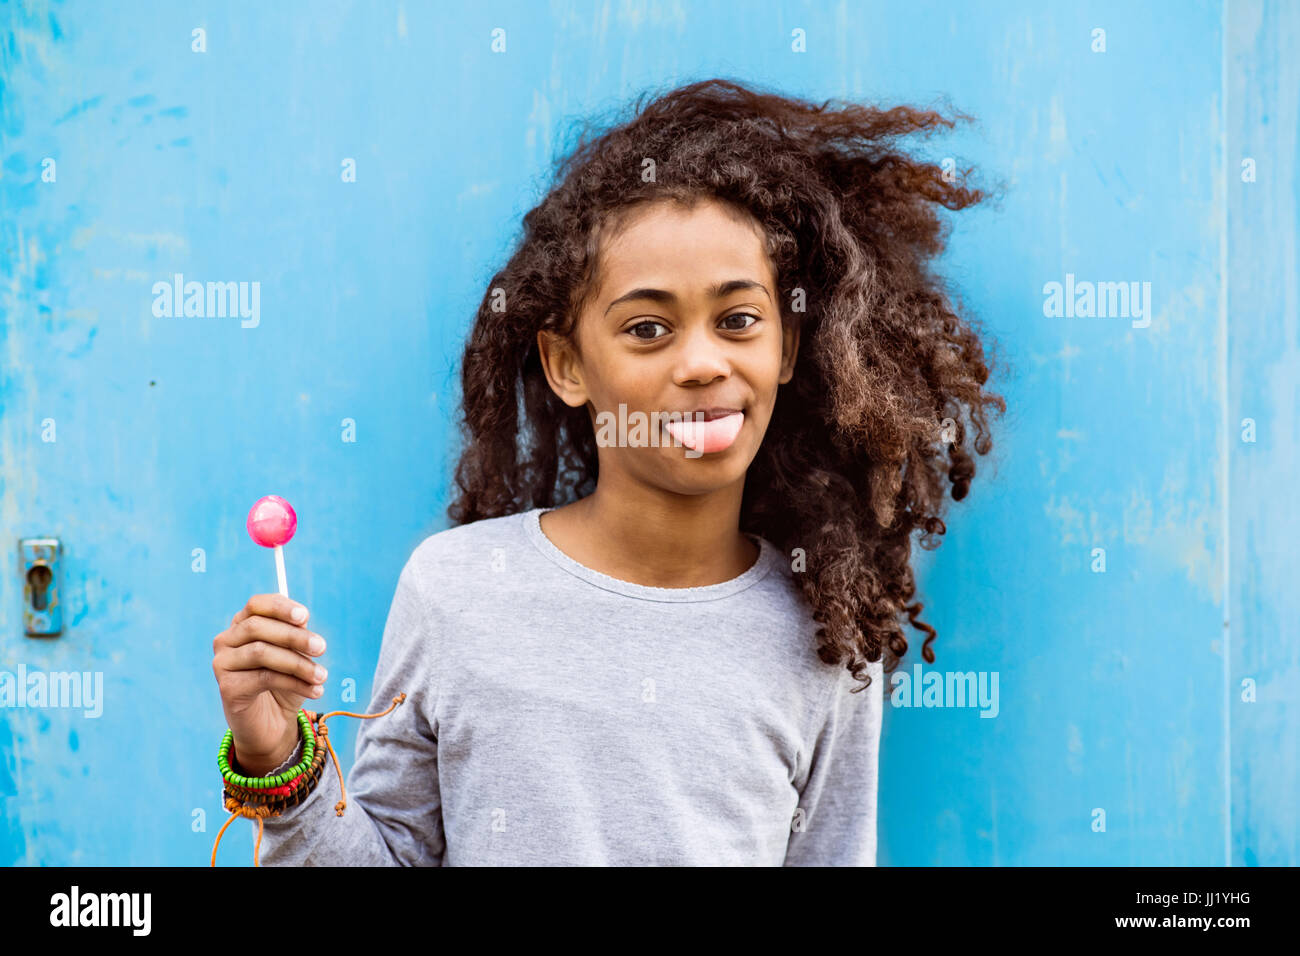 African american girl with curly hair outdoors eating lollipop. Stock Photo